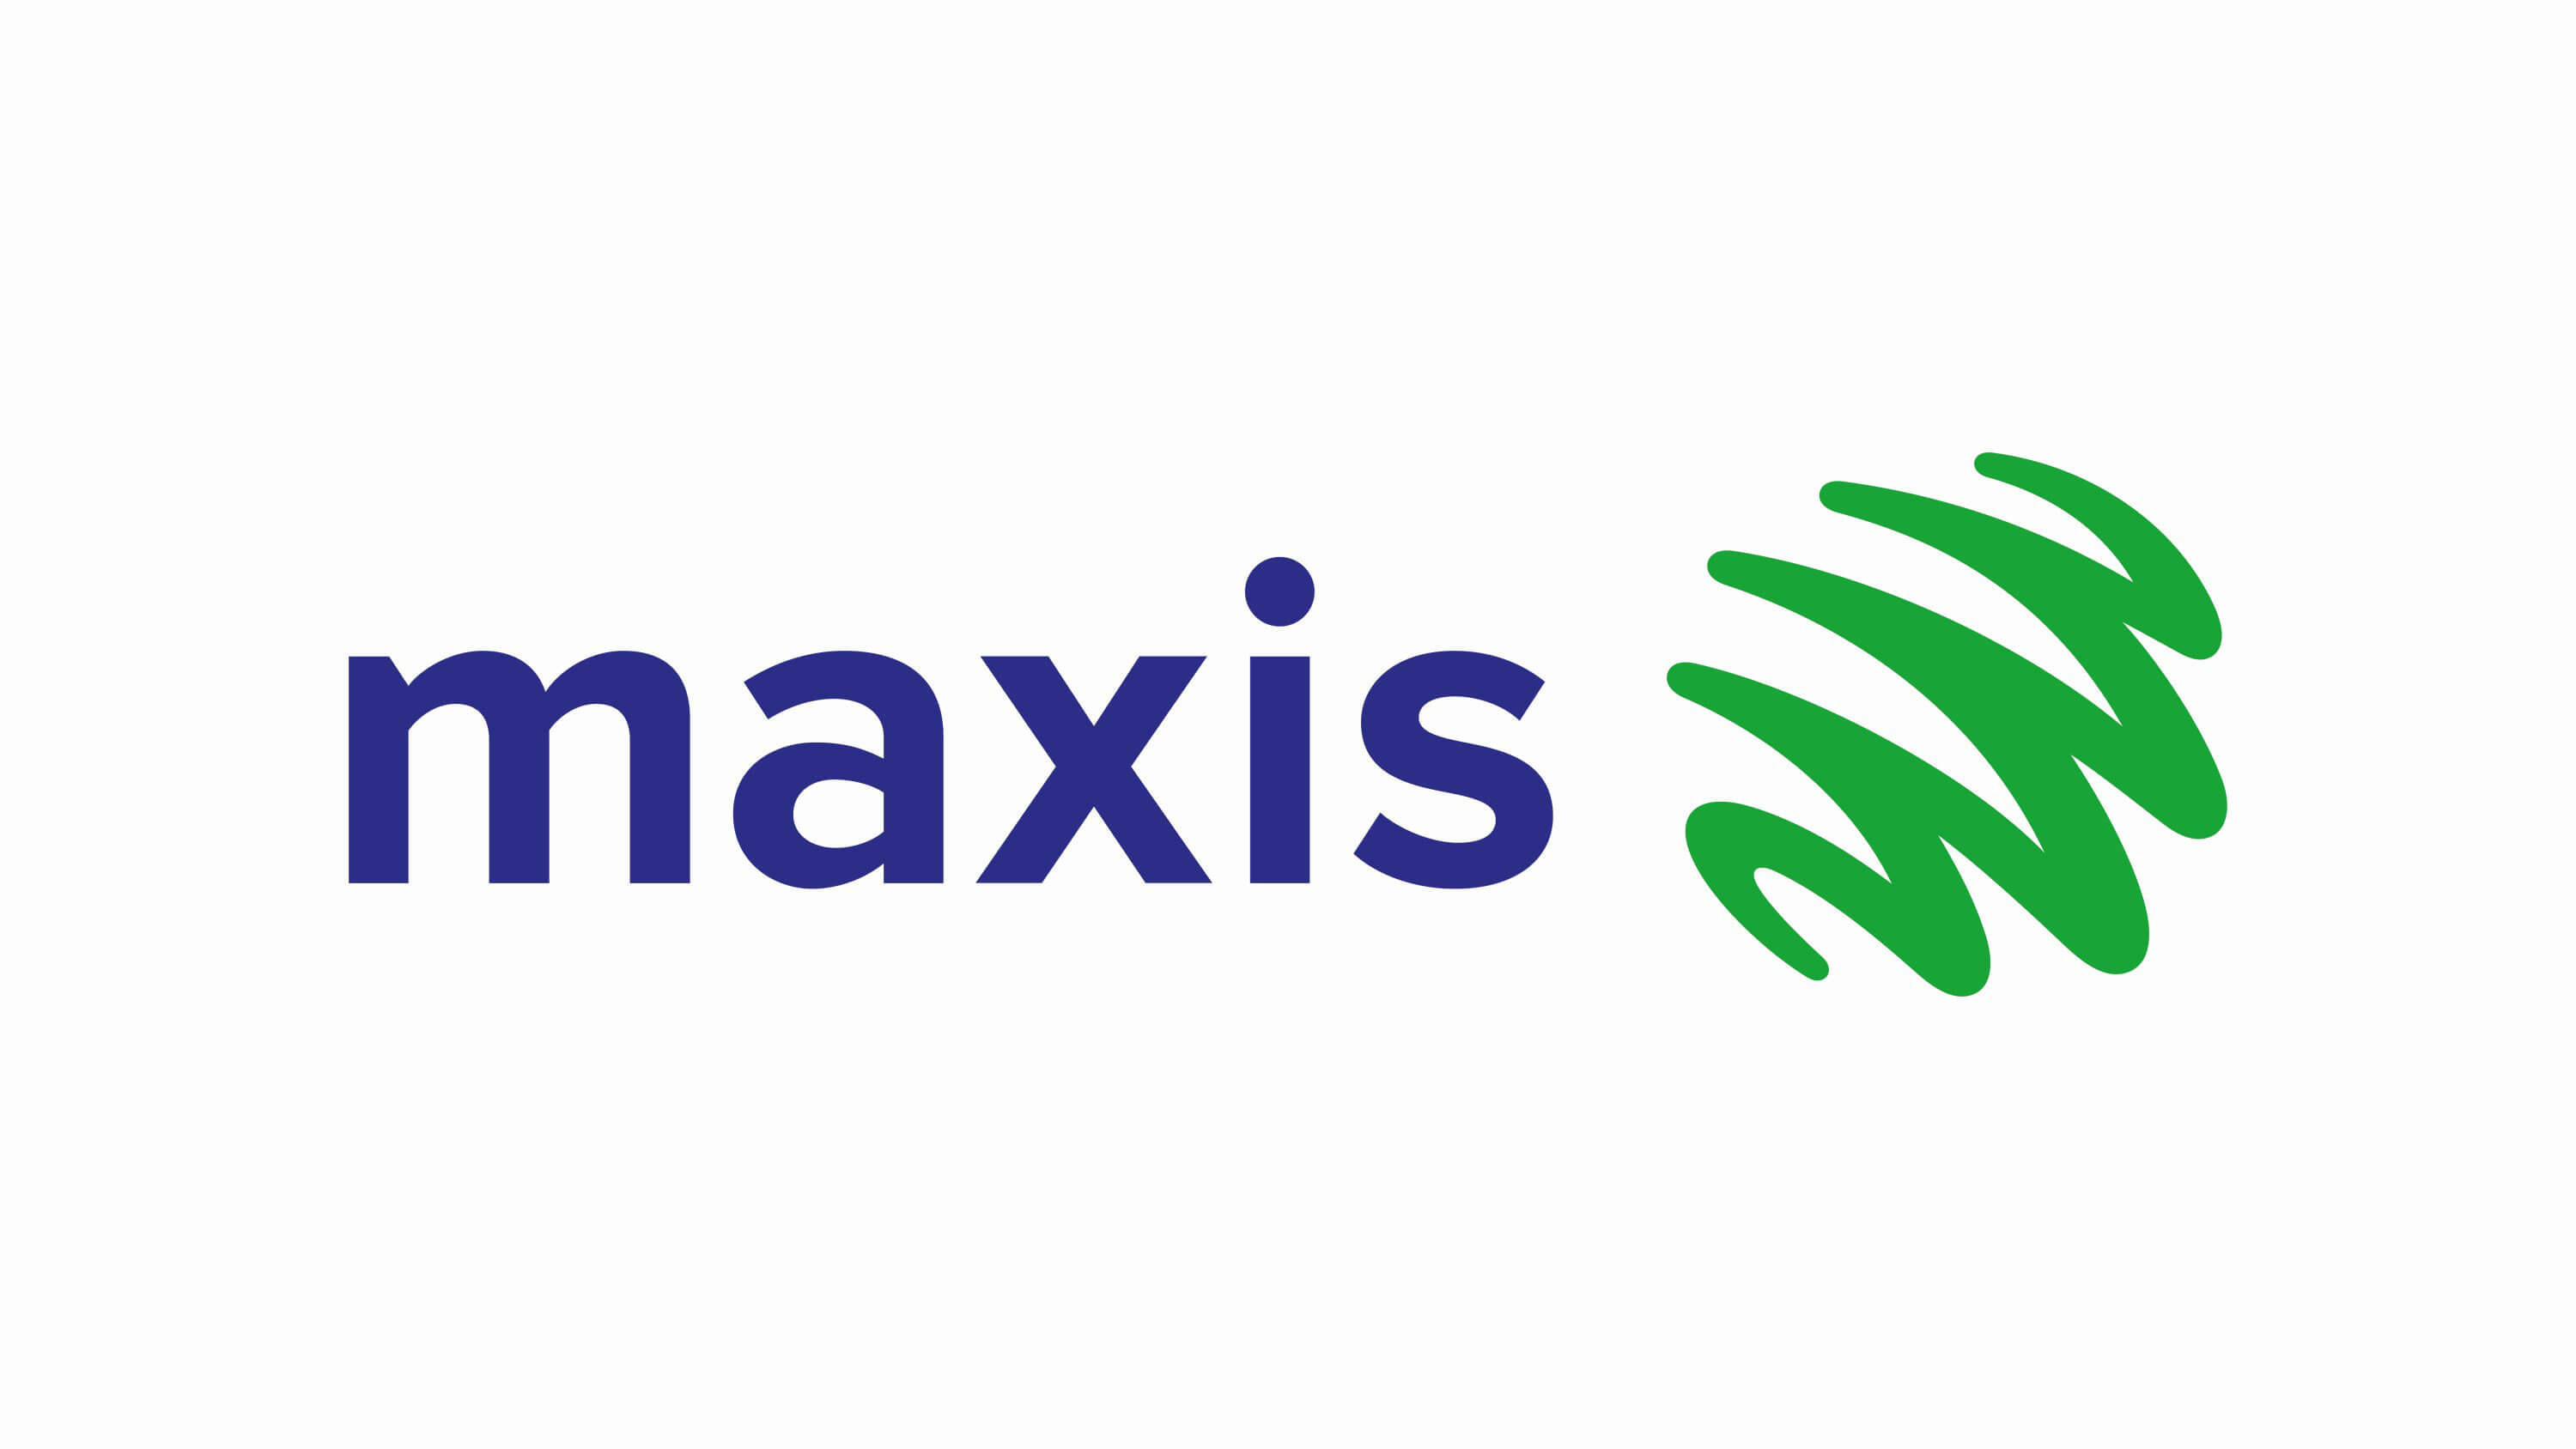 Maxis welcomes Government’s decision on next step for 5G implementation